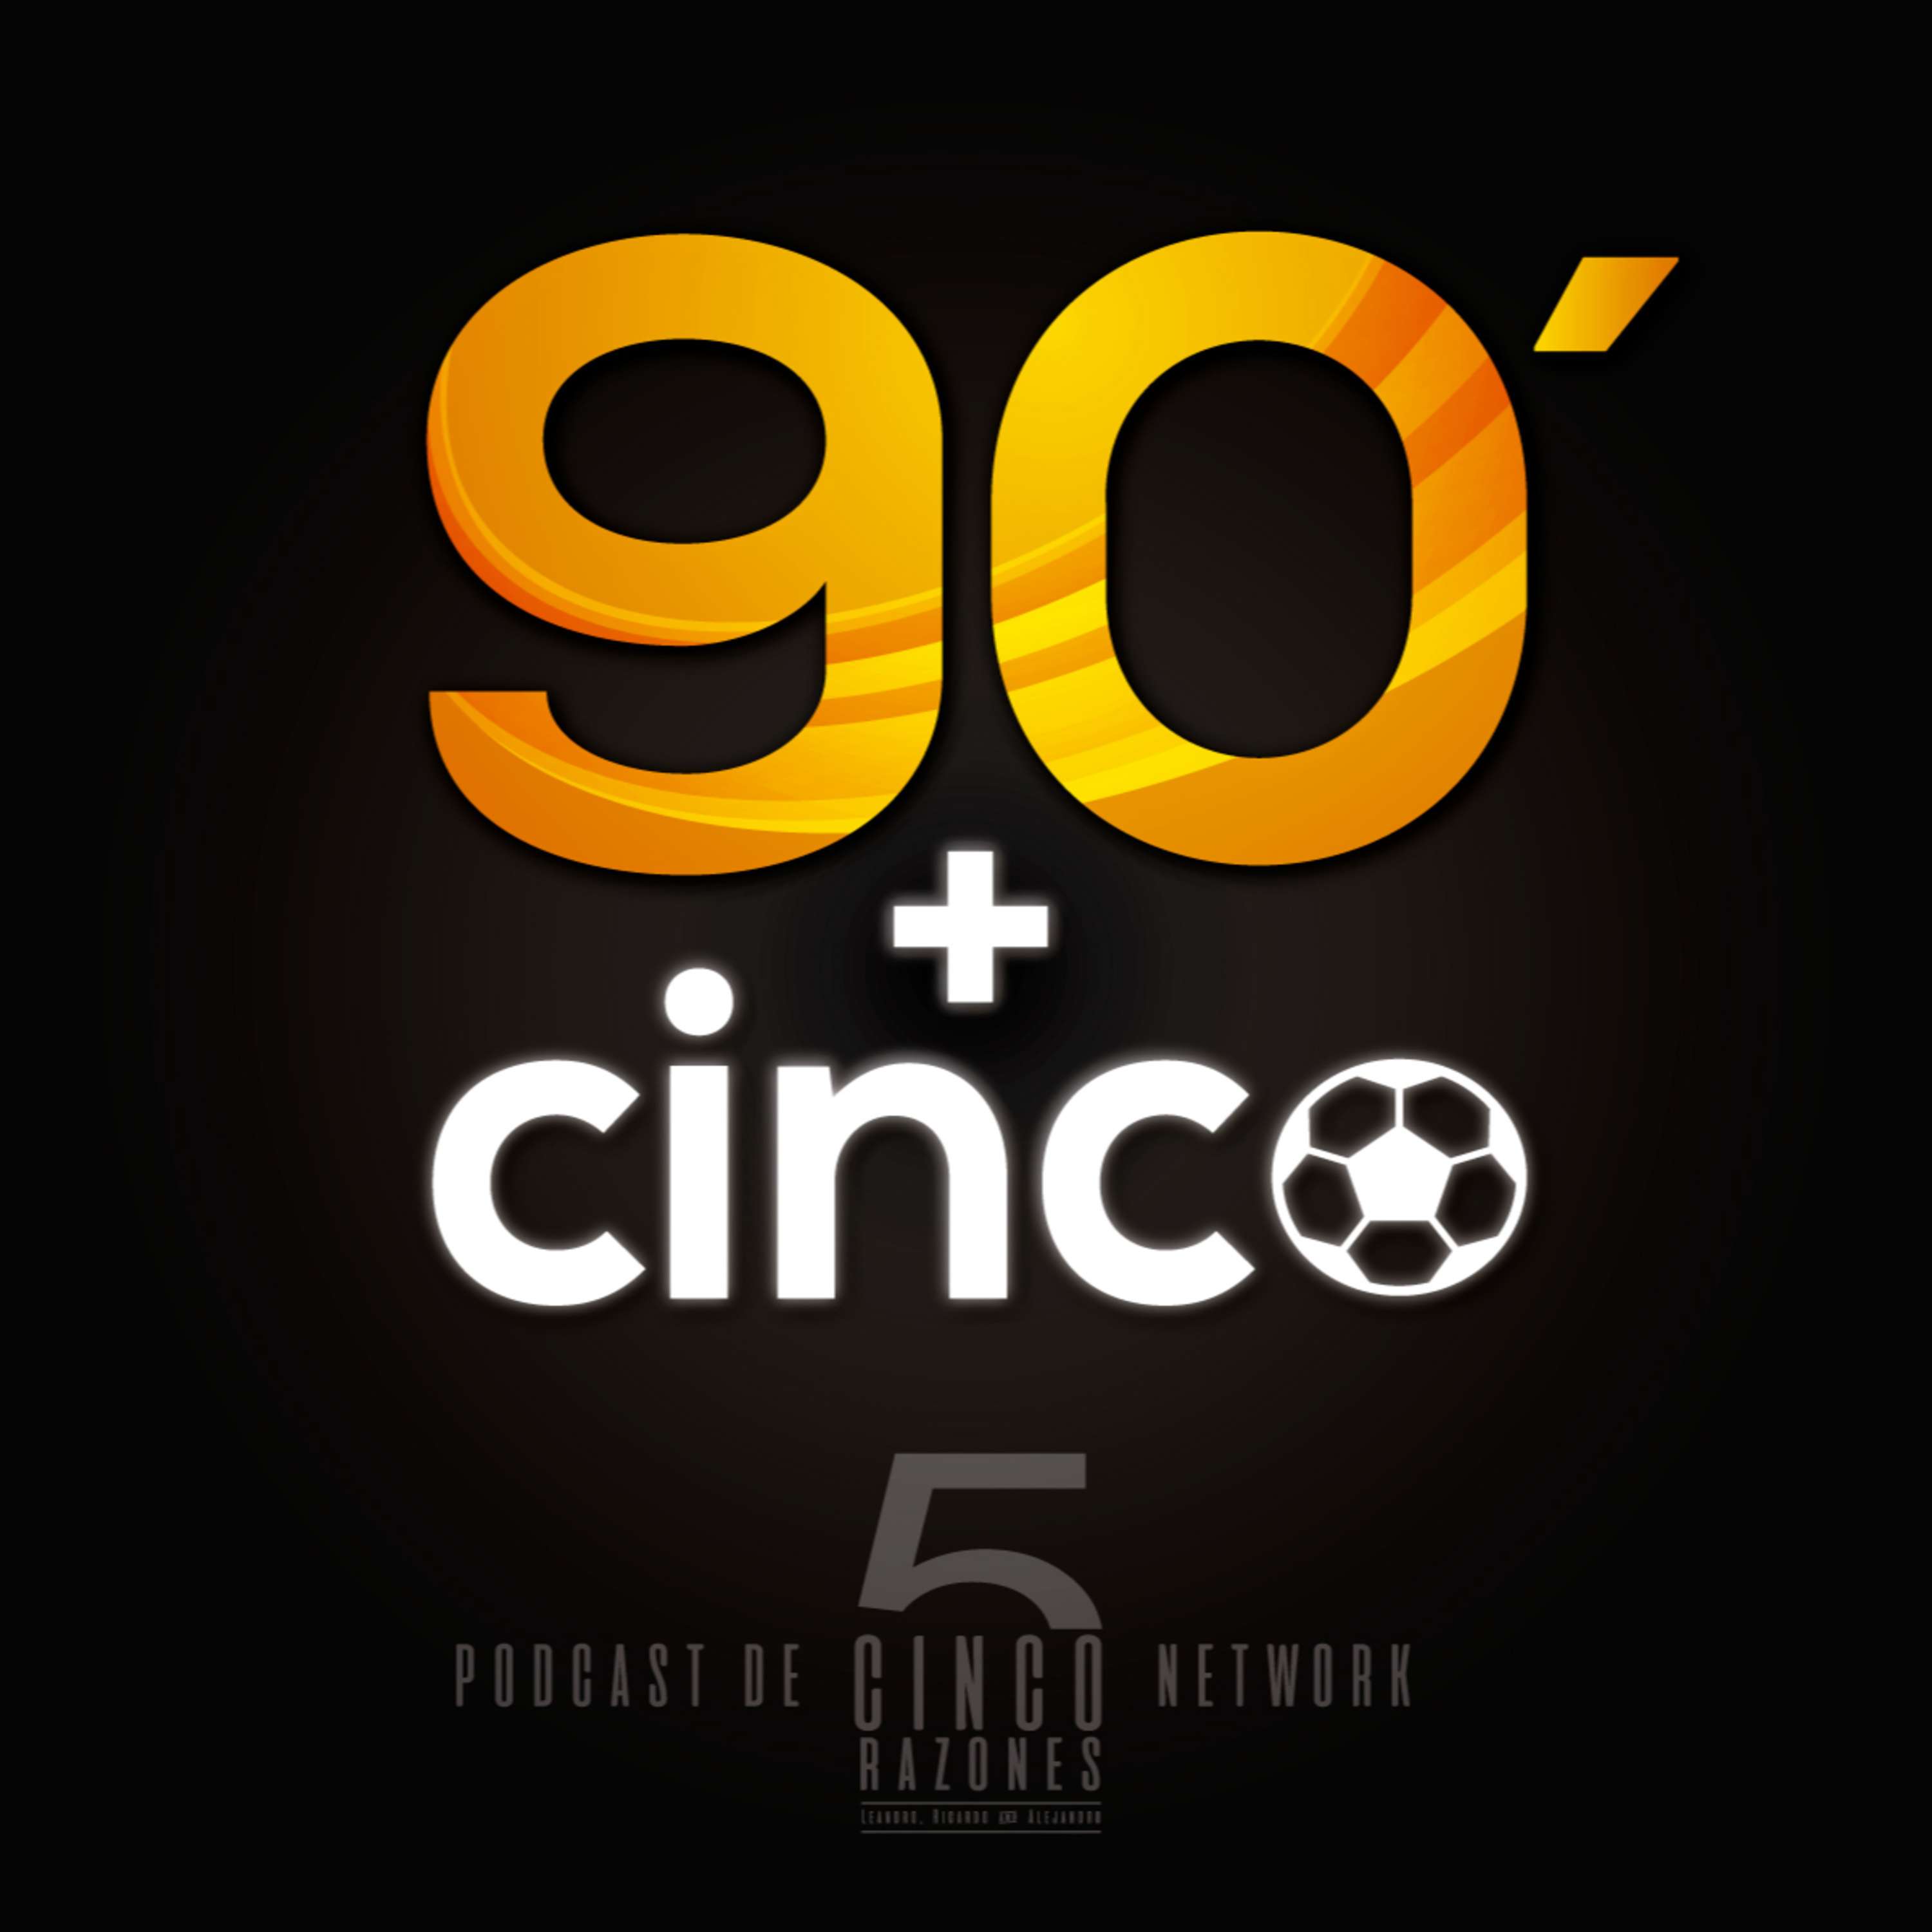 90+Cinco EP 01 - Inside the mind of Lionel Messi